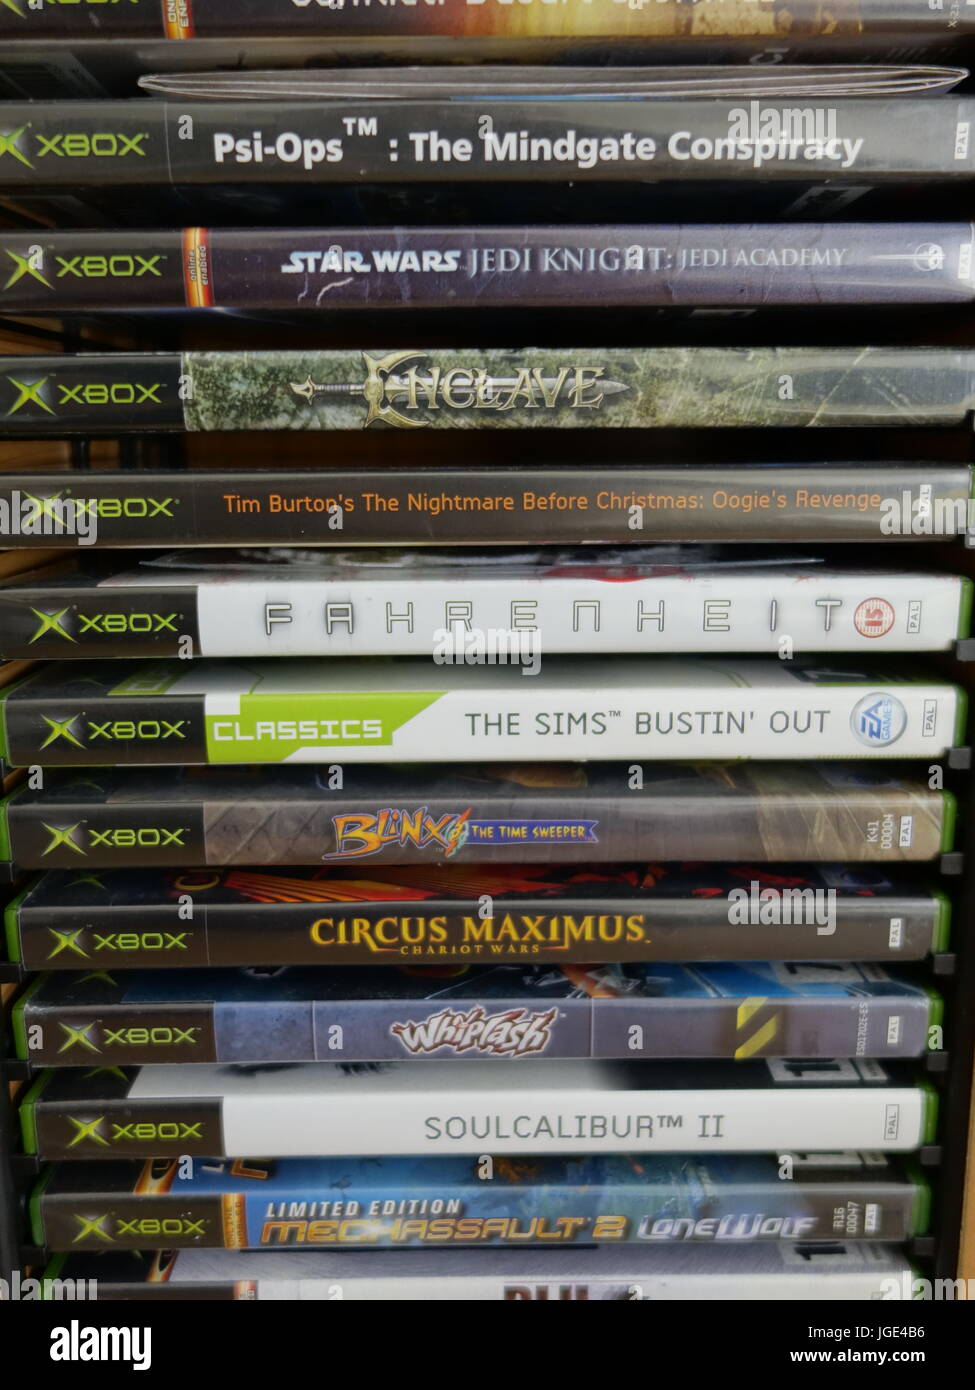 A collection of original Xbox games Stock Photo - Alamy